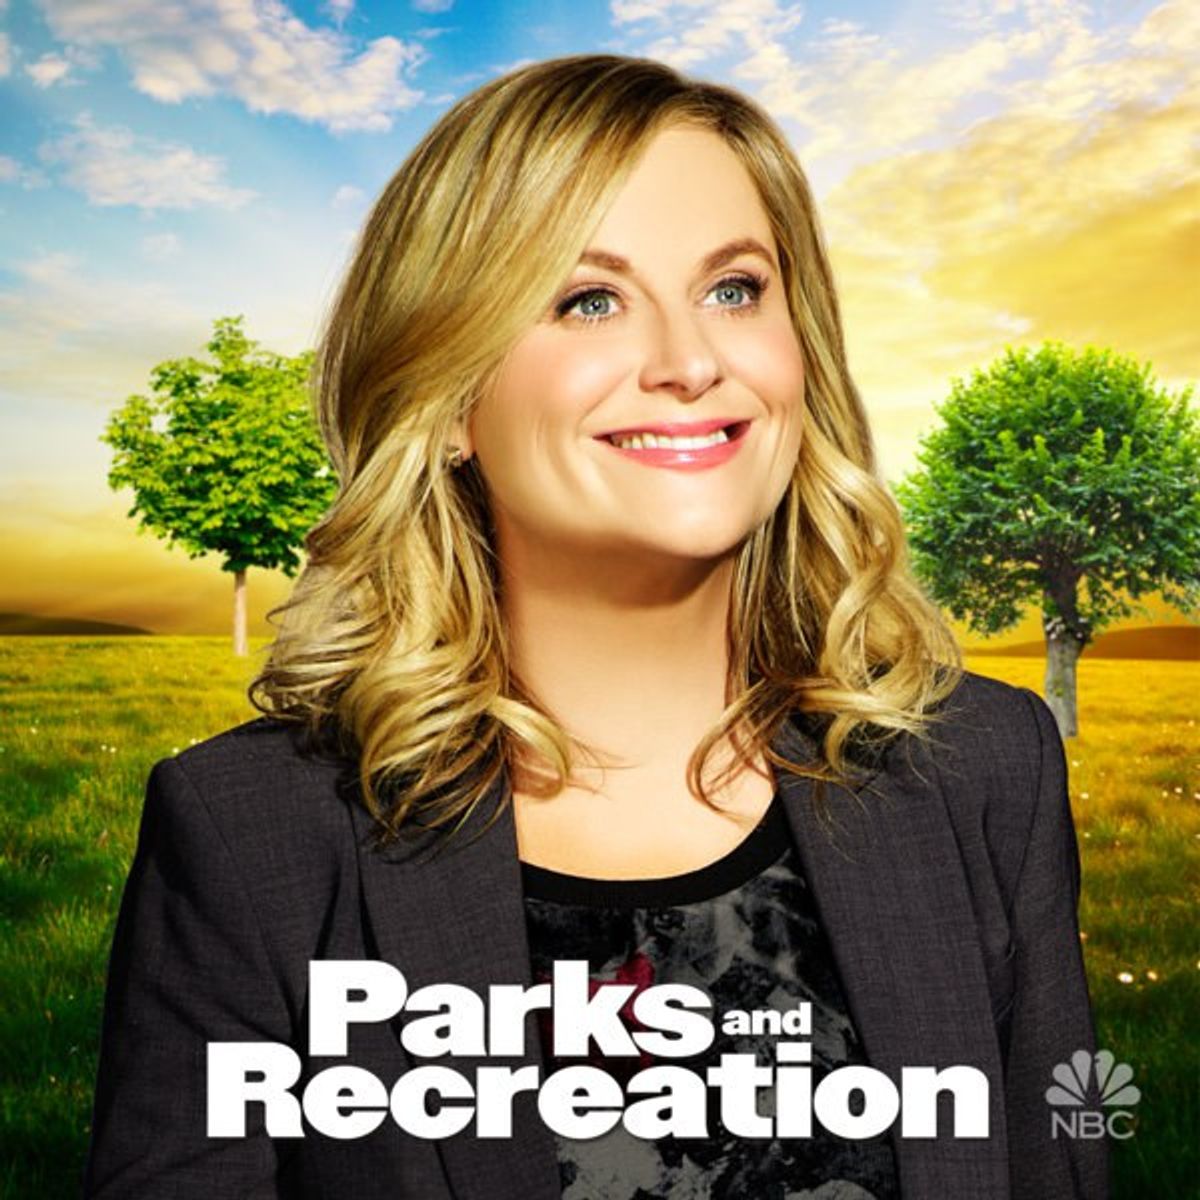 12 Reasons Why Leslie Knope Should Be President